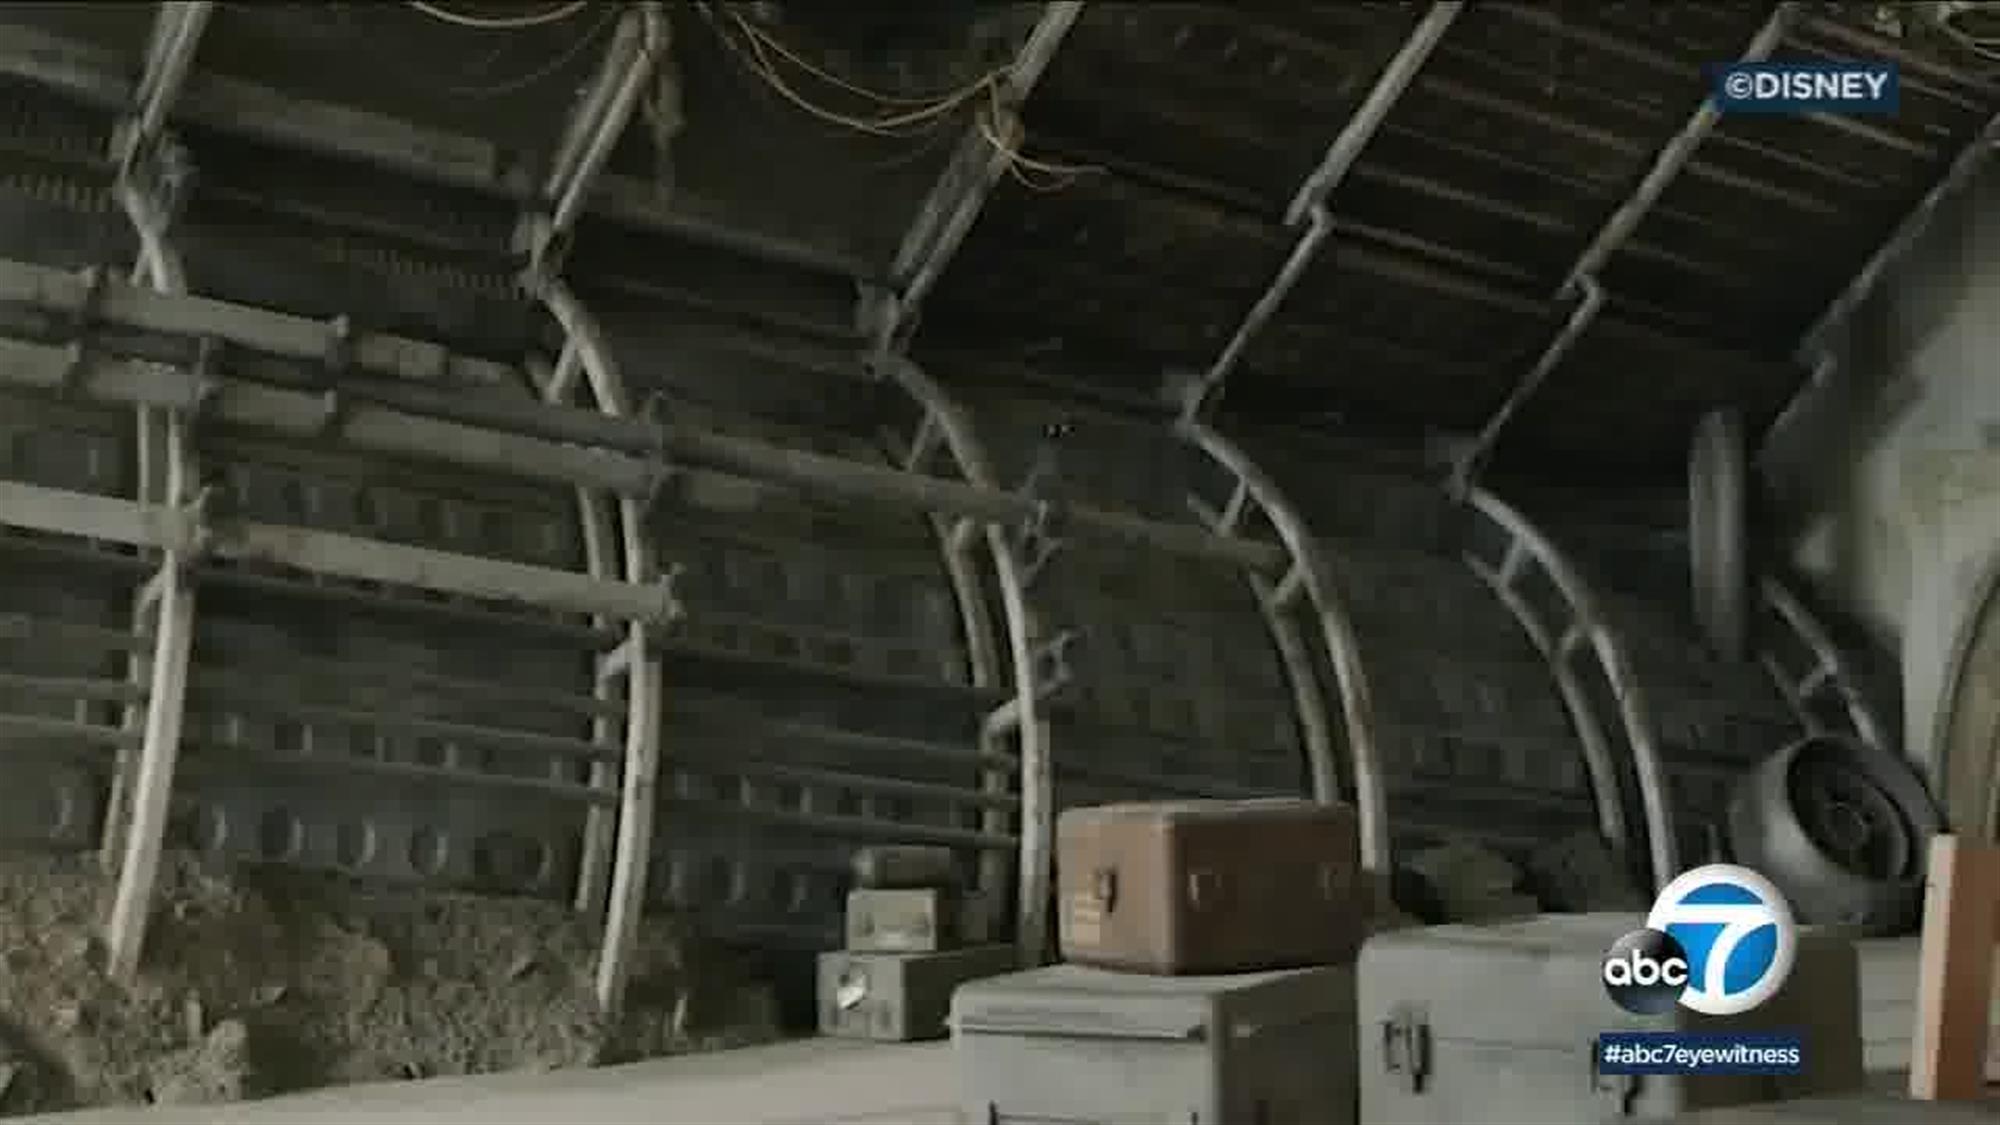 Cargo crates and other discarded engine parts help contribute to the lived-in feeling that Star Wars is so famous for.